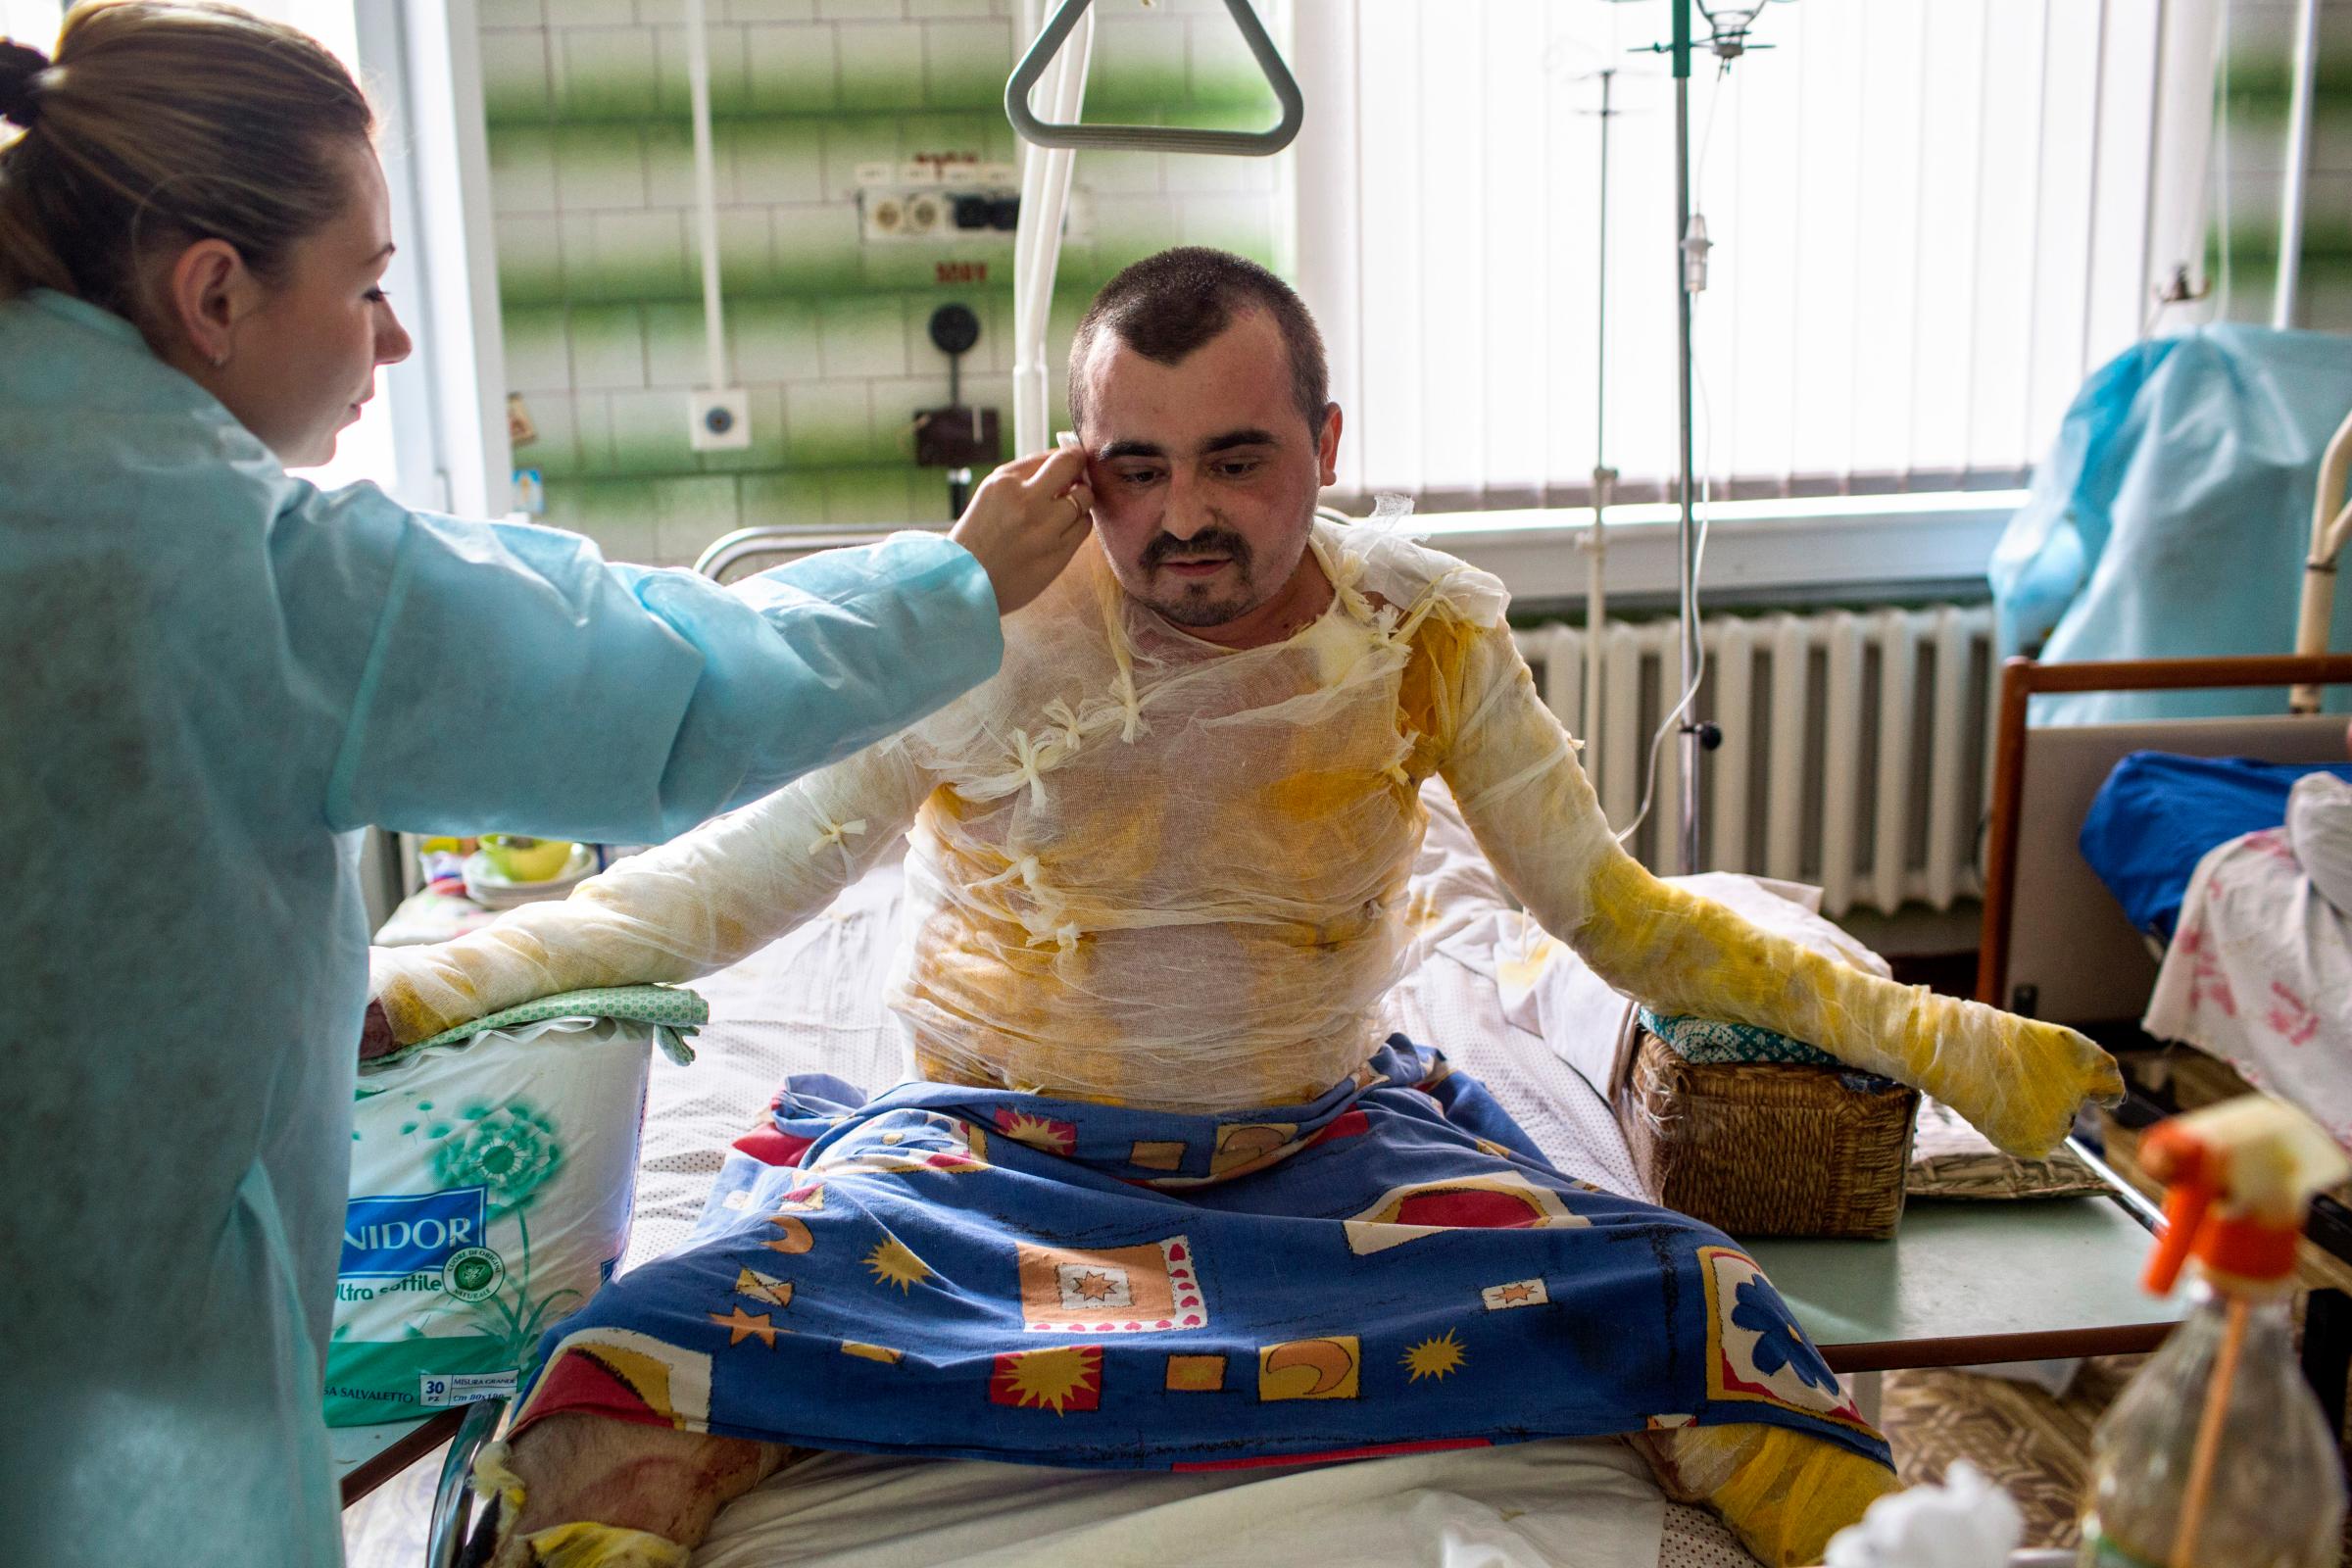 Svitlana Kapusta, 29, wipes the brow of her husband, Sgt. Sergey Masan, a Ukrainian paratrooper from the southern region of Mykolaiv, as he recovers in a hospital in Dnipropetrovsk, Ukraine, Sept. 29, 2014. Masan sustained burns to 70% of his body and lost several fingers in a grad rocket attack in the village of Dyakovo, in Luhansk Oblast near the Russian border, in July 2014. He spent approximately three months in the warzone and asserted that his brigade was frequently fired upon with grad rockets launched from Russia into Ukraine. "Our life has changed completely," Kapusta said.